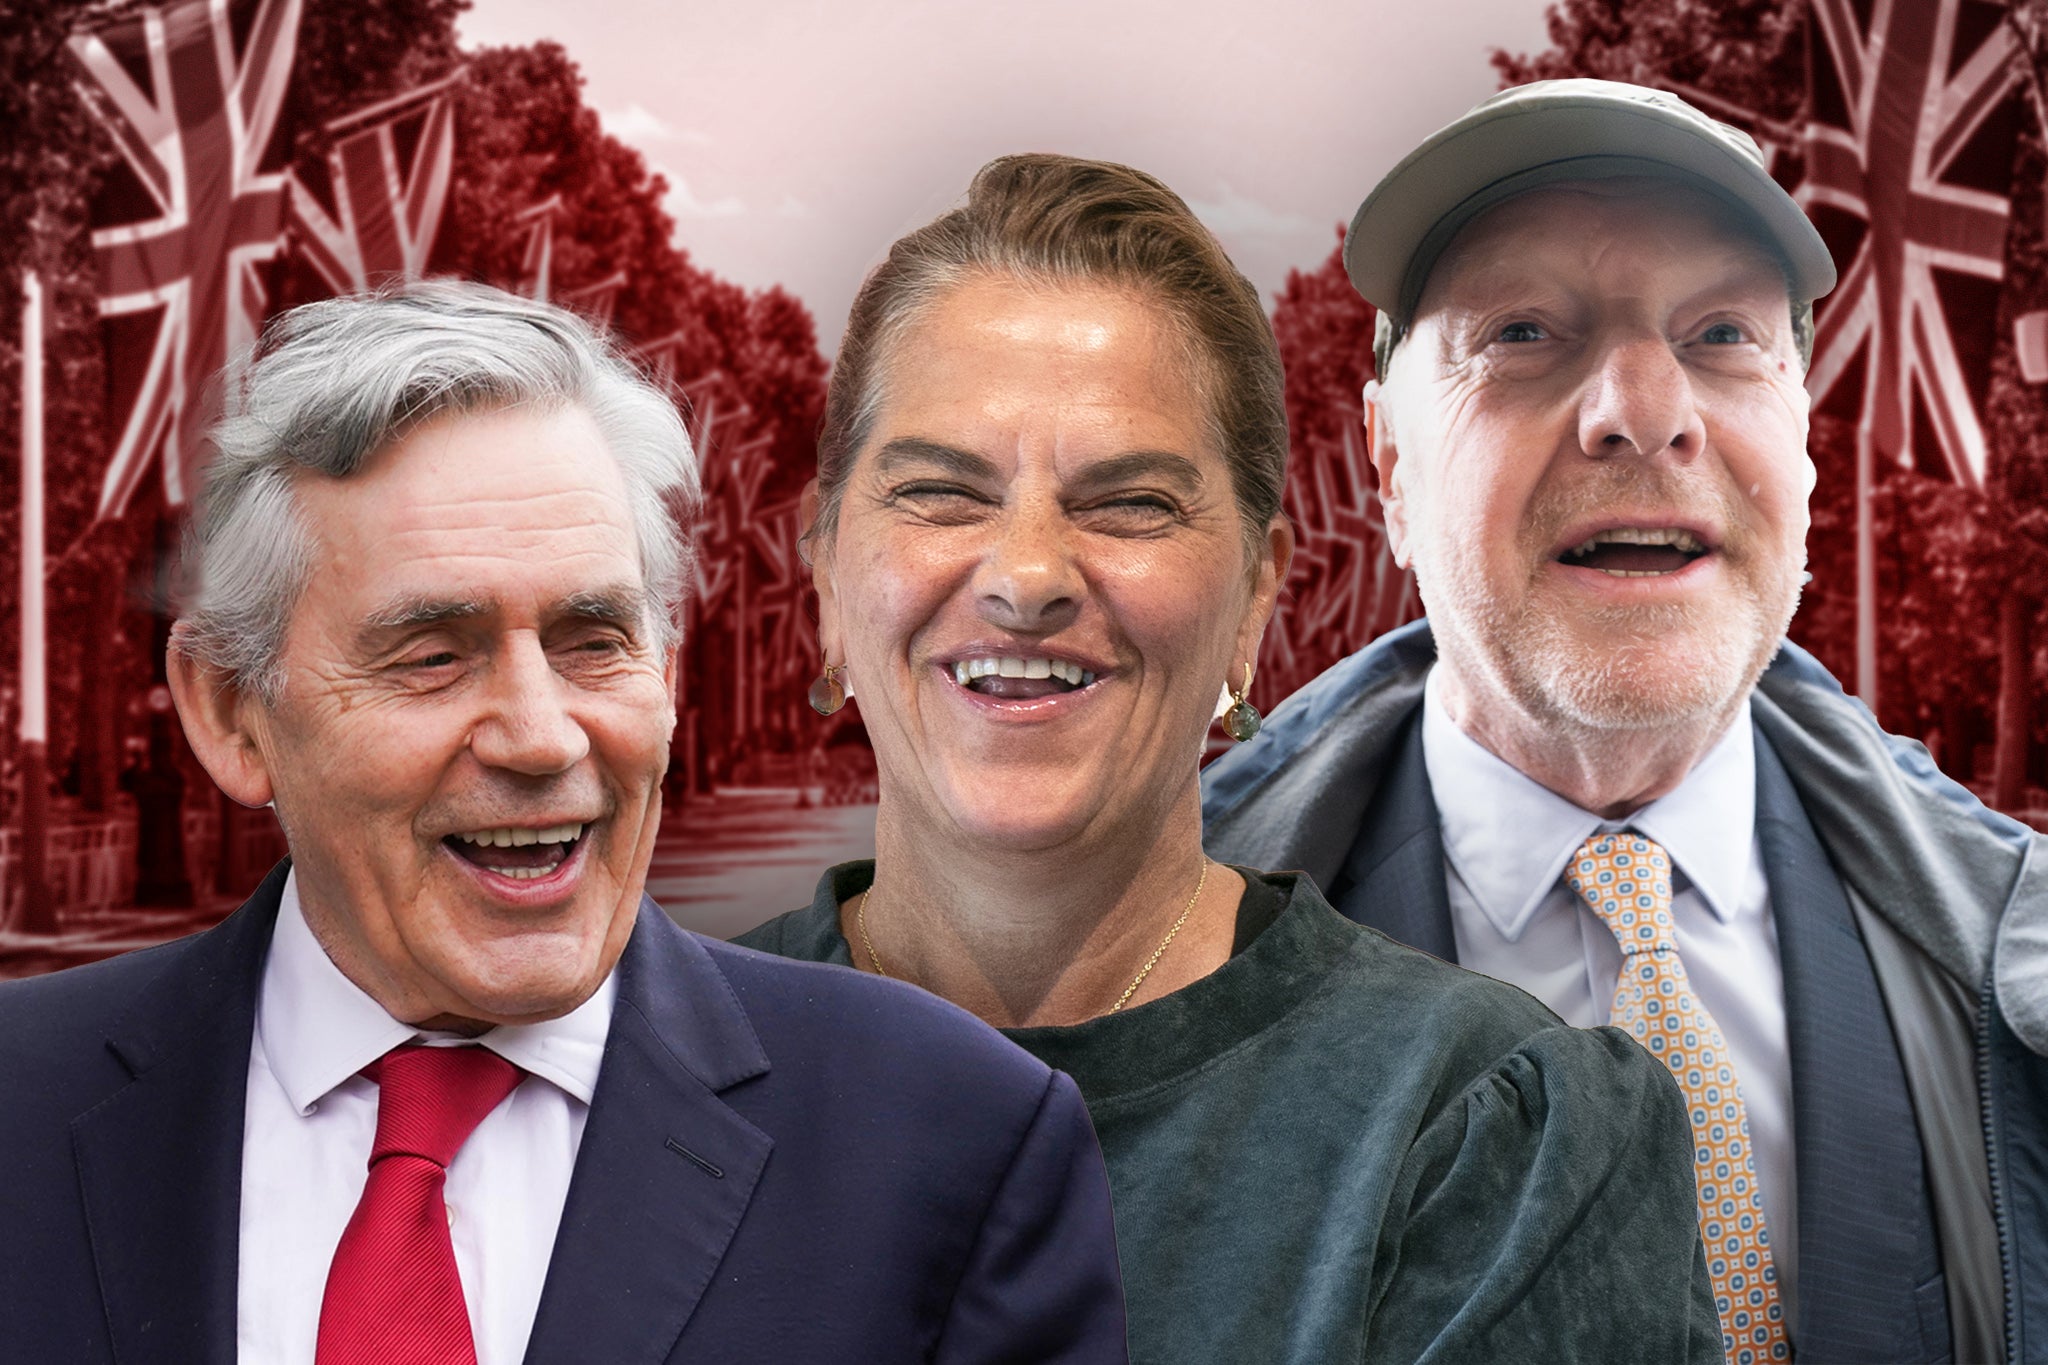 Former prime minister Gordon Brown, artist Tracey Emin and Post Office campaigner Alan Bates are among the famous faces recognised for their outstanding contribution to society in the King’s birthday honours list